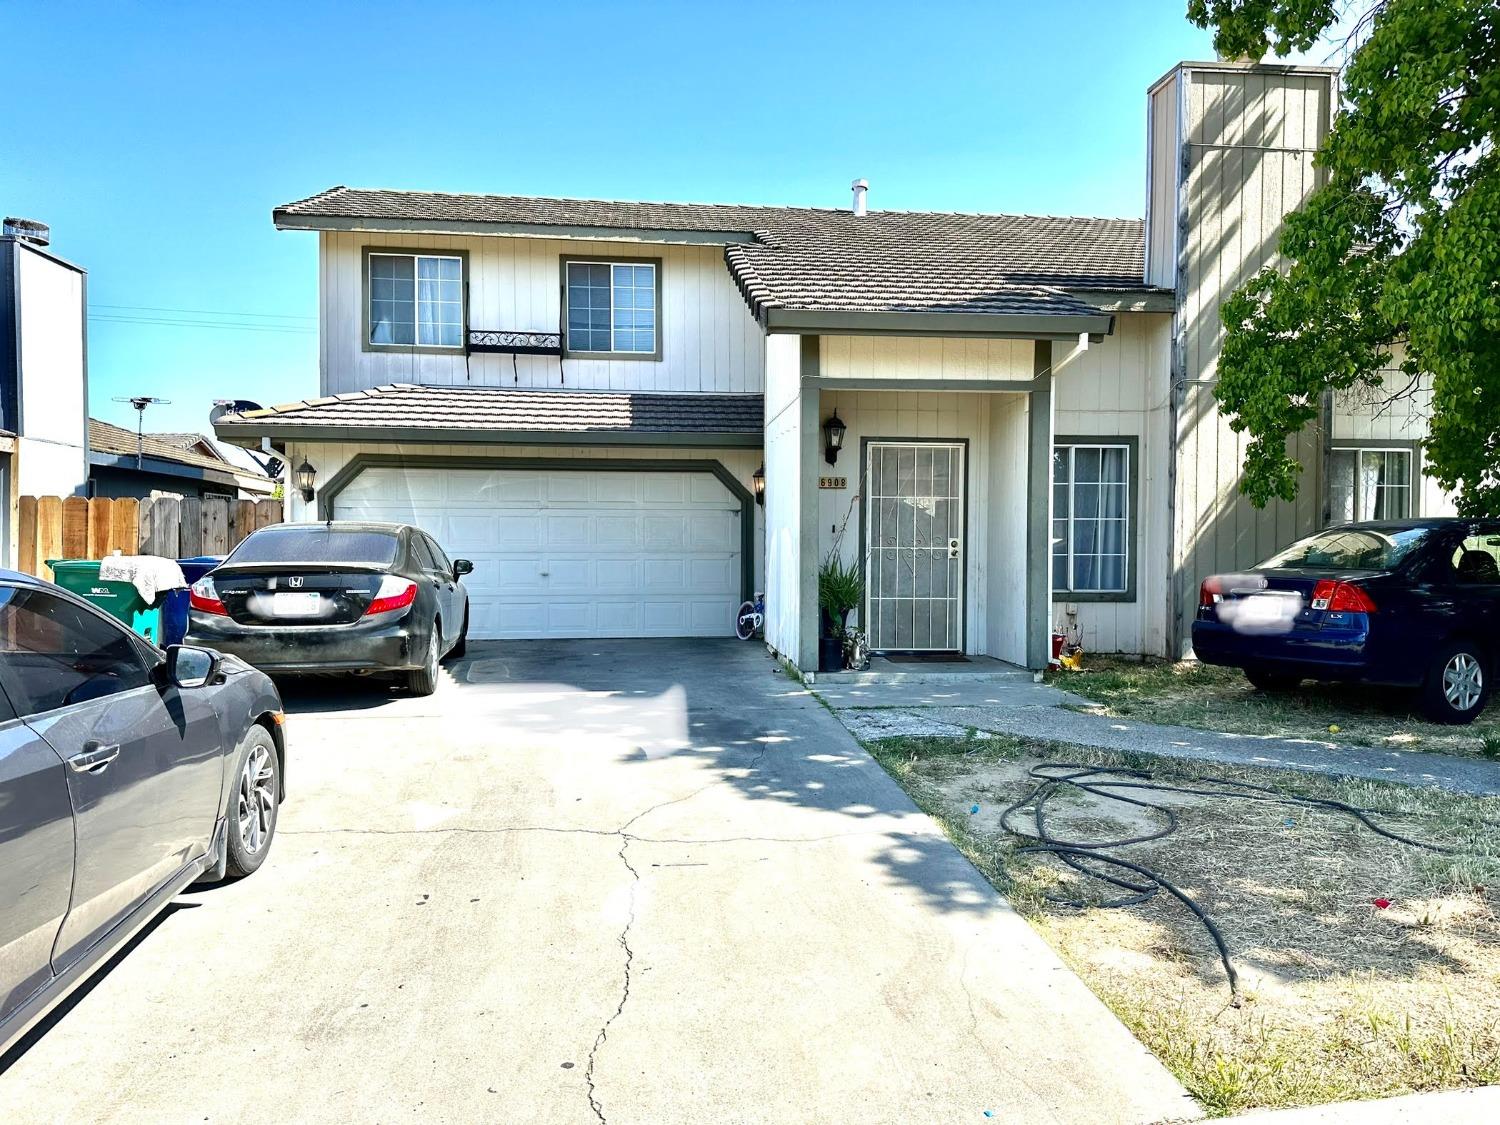 Photo of 6908 Lawrence Ct in Winton, CA